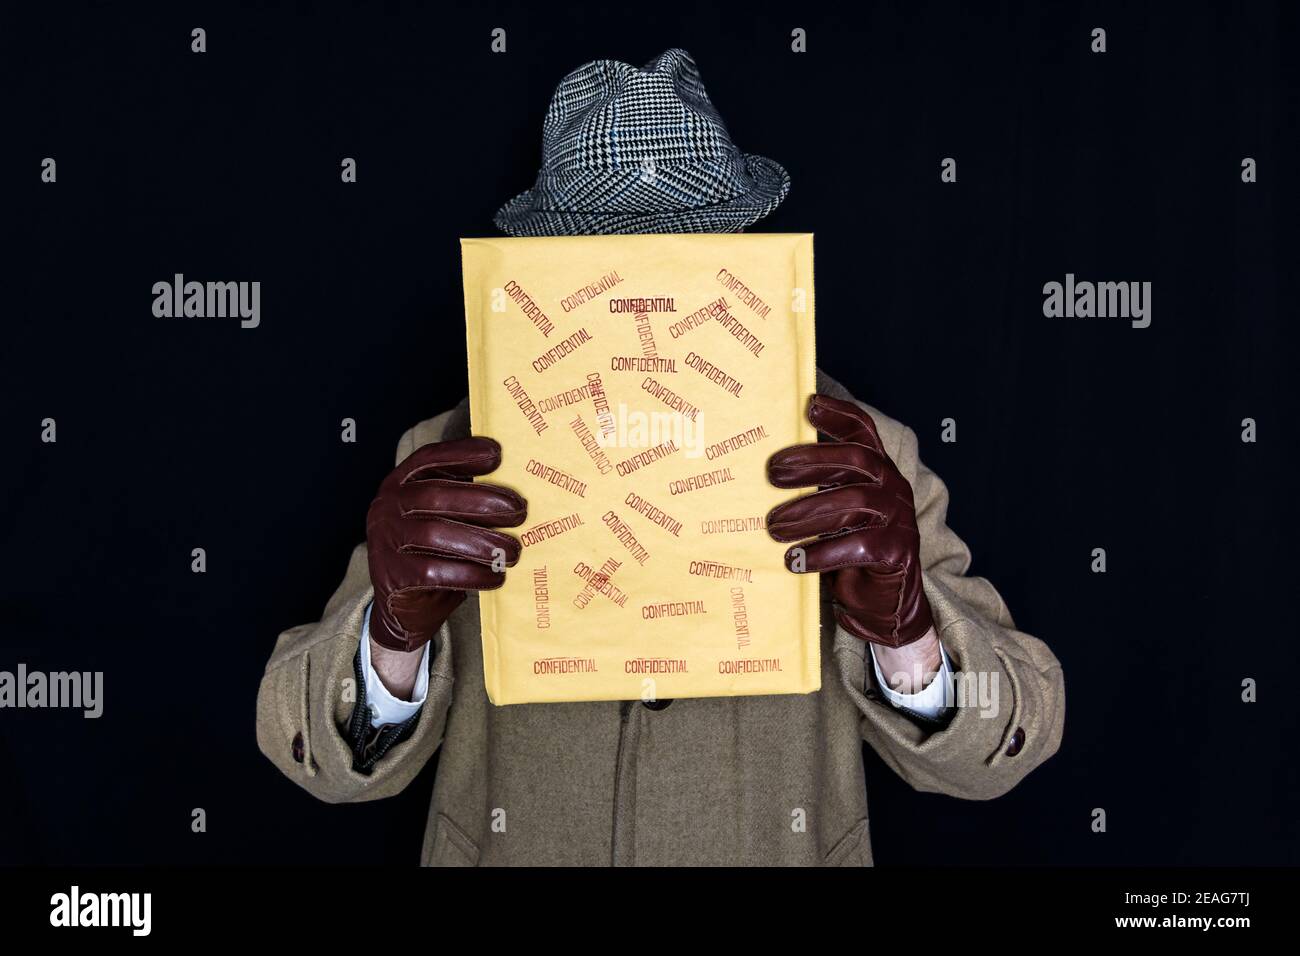 Portrait of Man in Coat and Hat Holding Confidential Envelope Over His Face on Black Background. Film Noir Secret Agent Spy. Identity Theft and Crime. Stock Photo